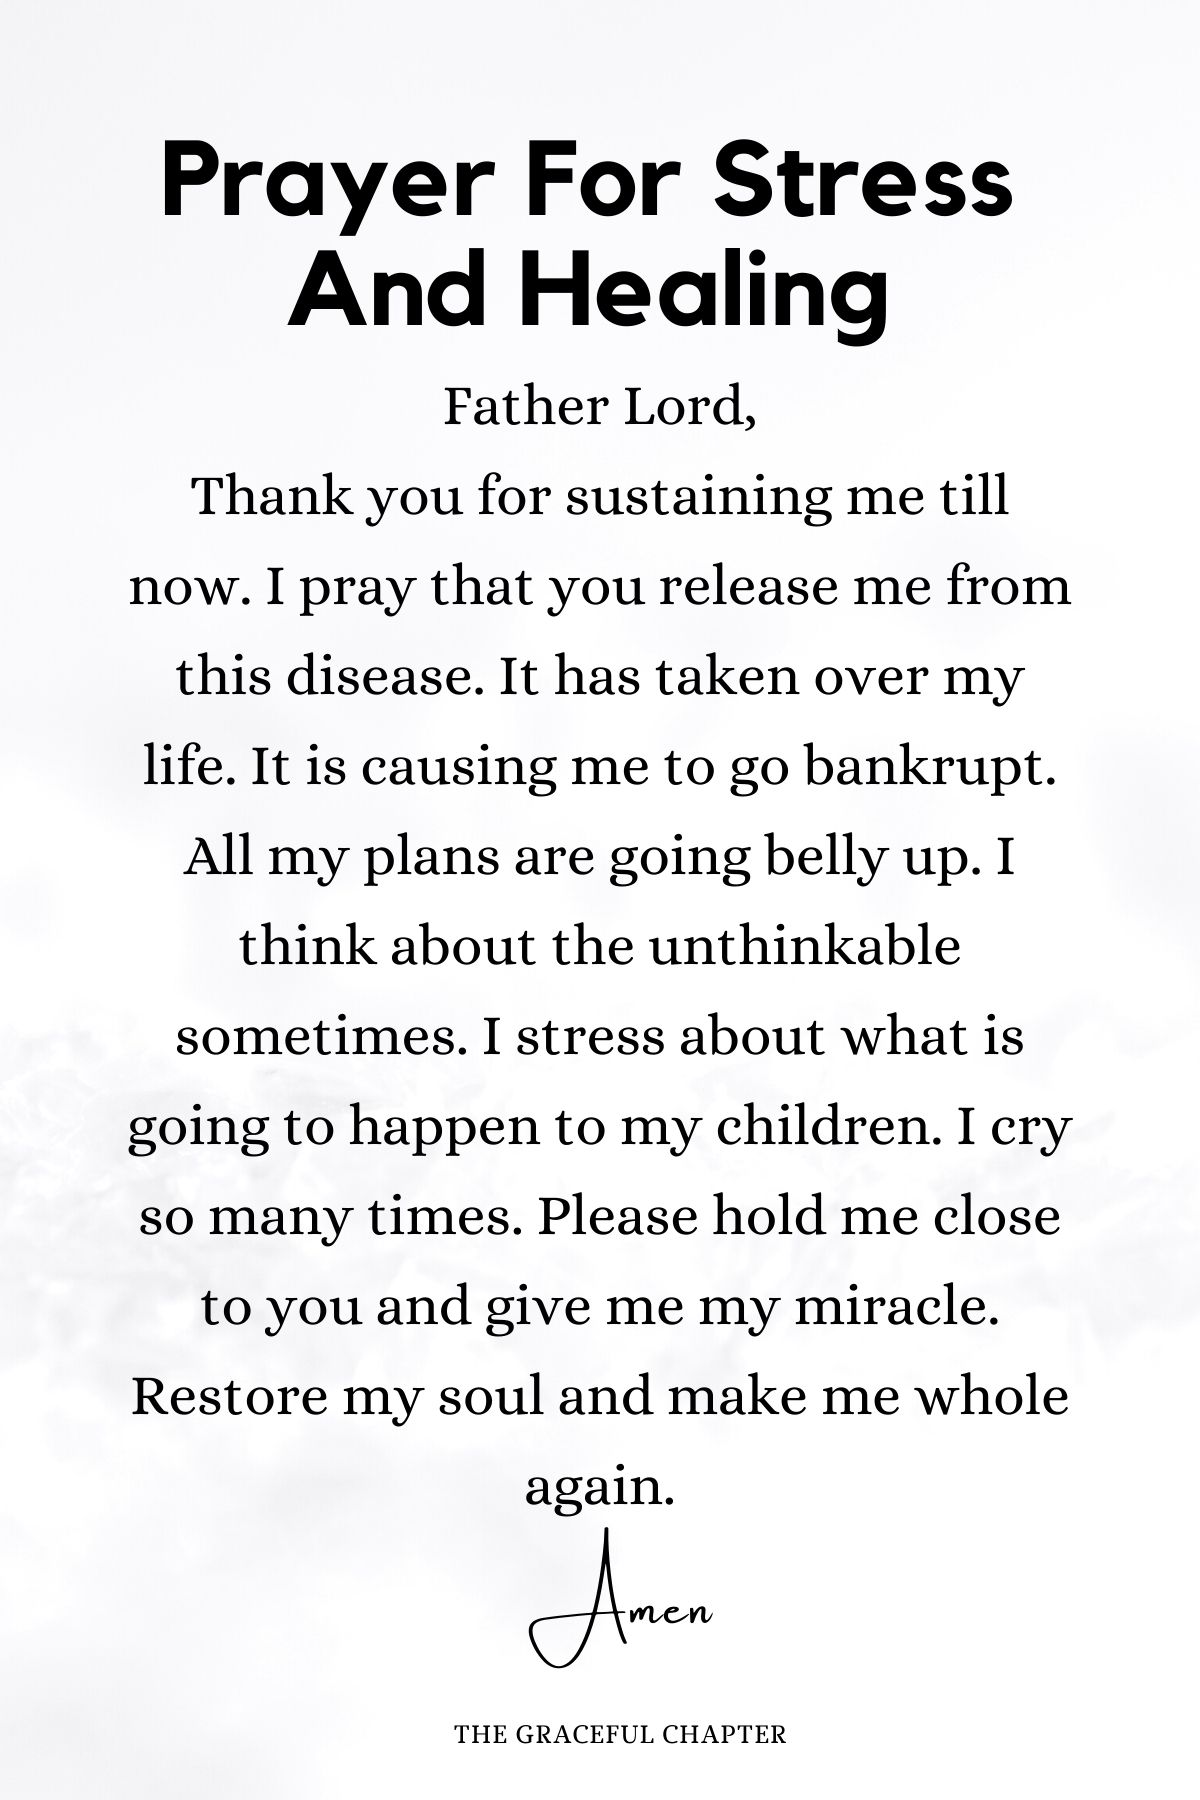 Prayer for stress and healing